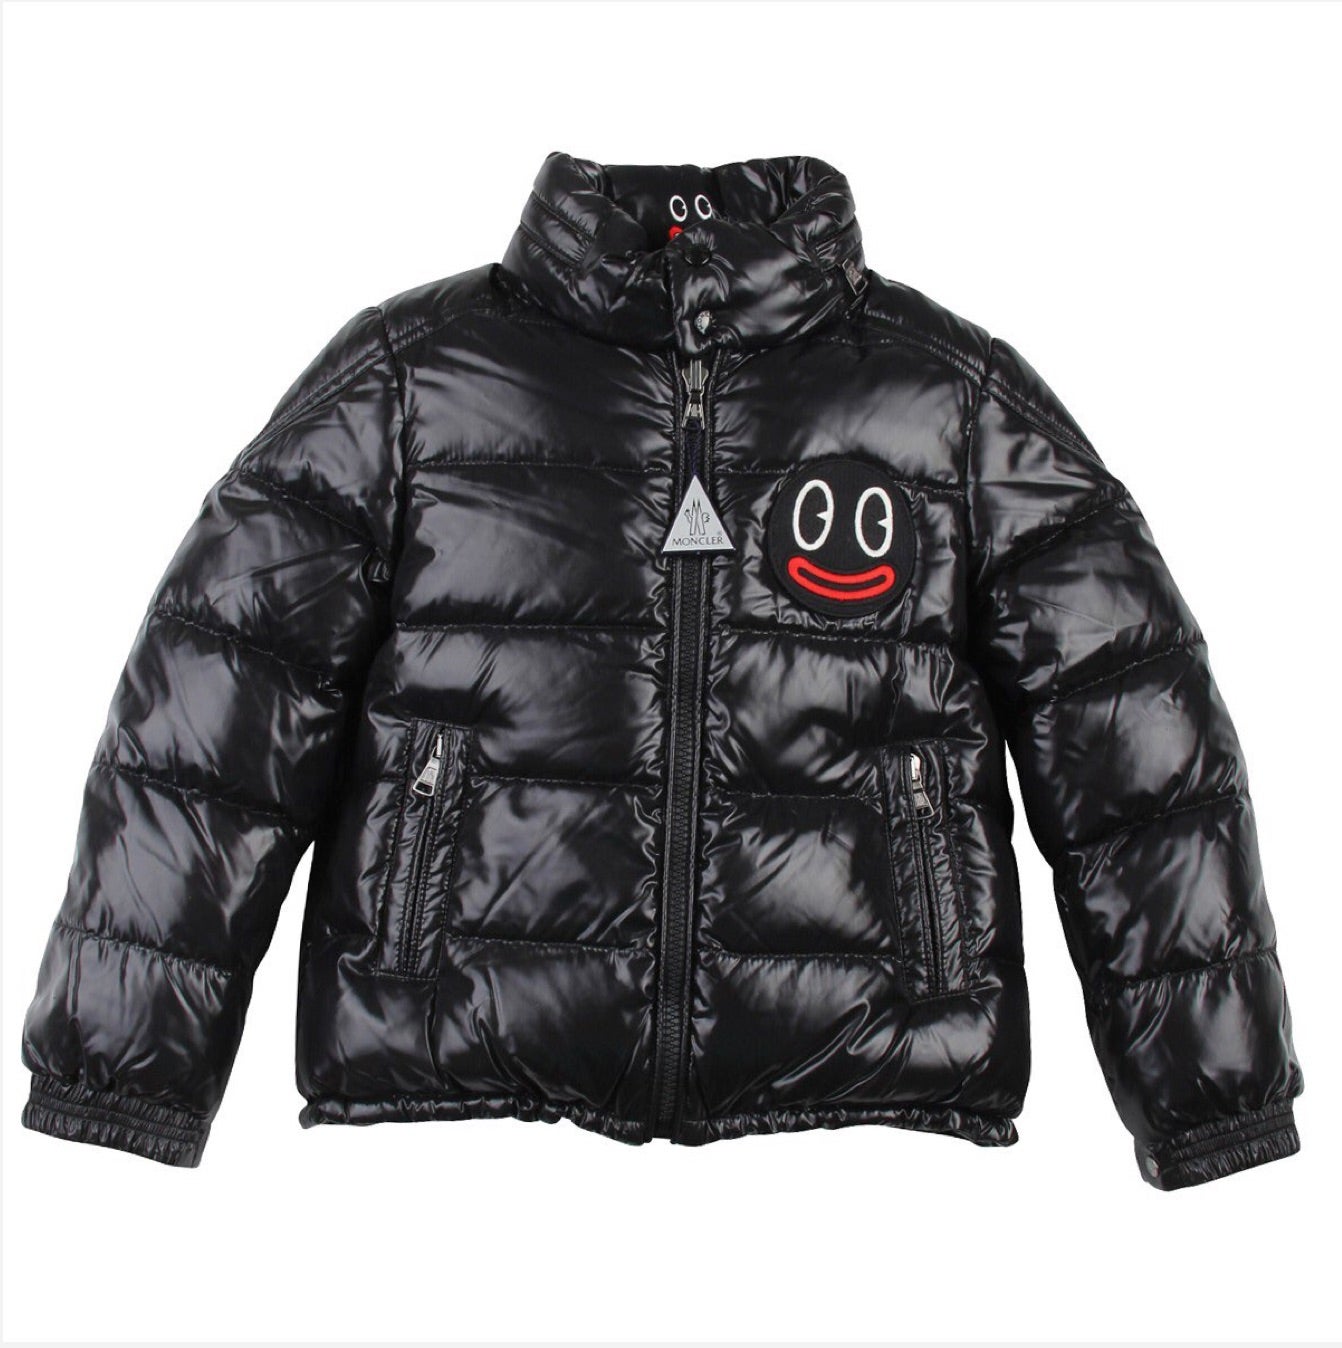 Outerwear Company Moncler Releases 